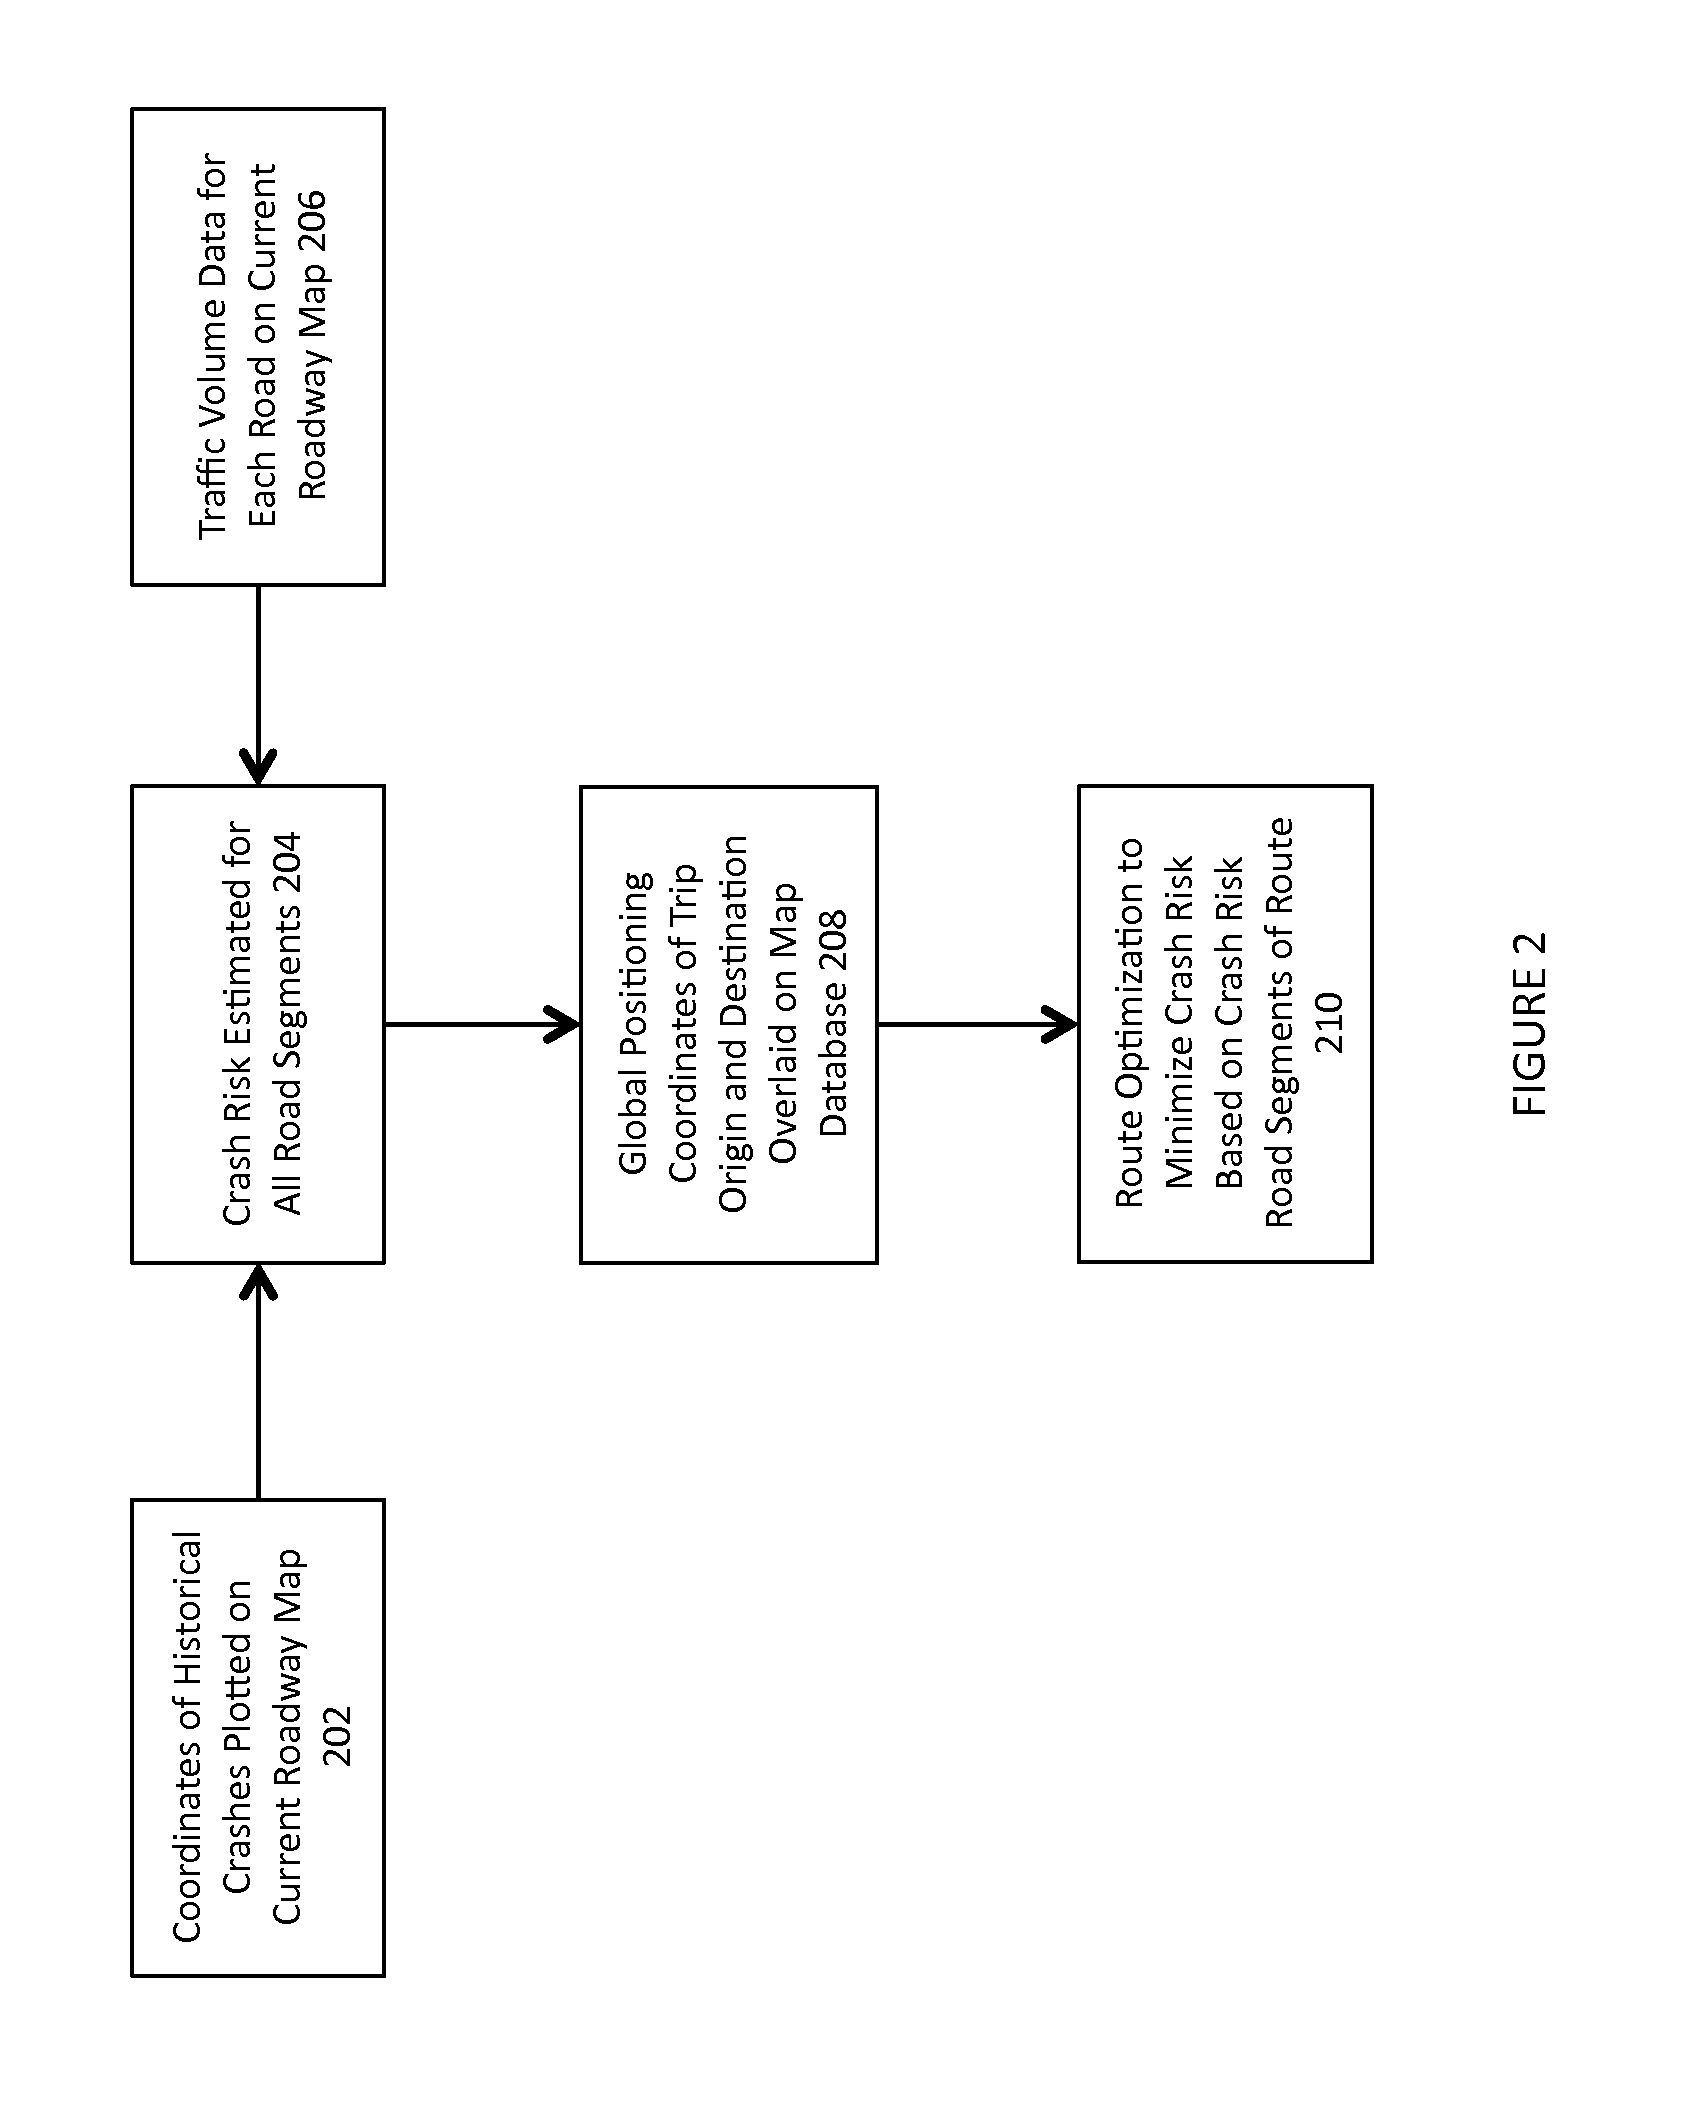 Route planning system and methodology which account for safety factors